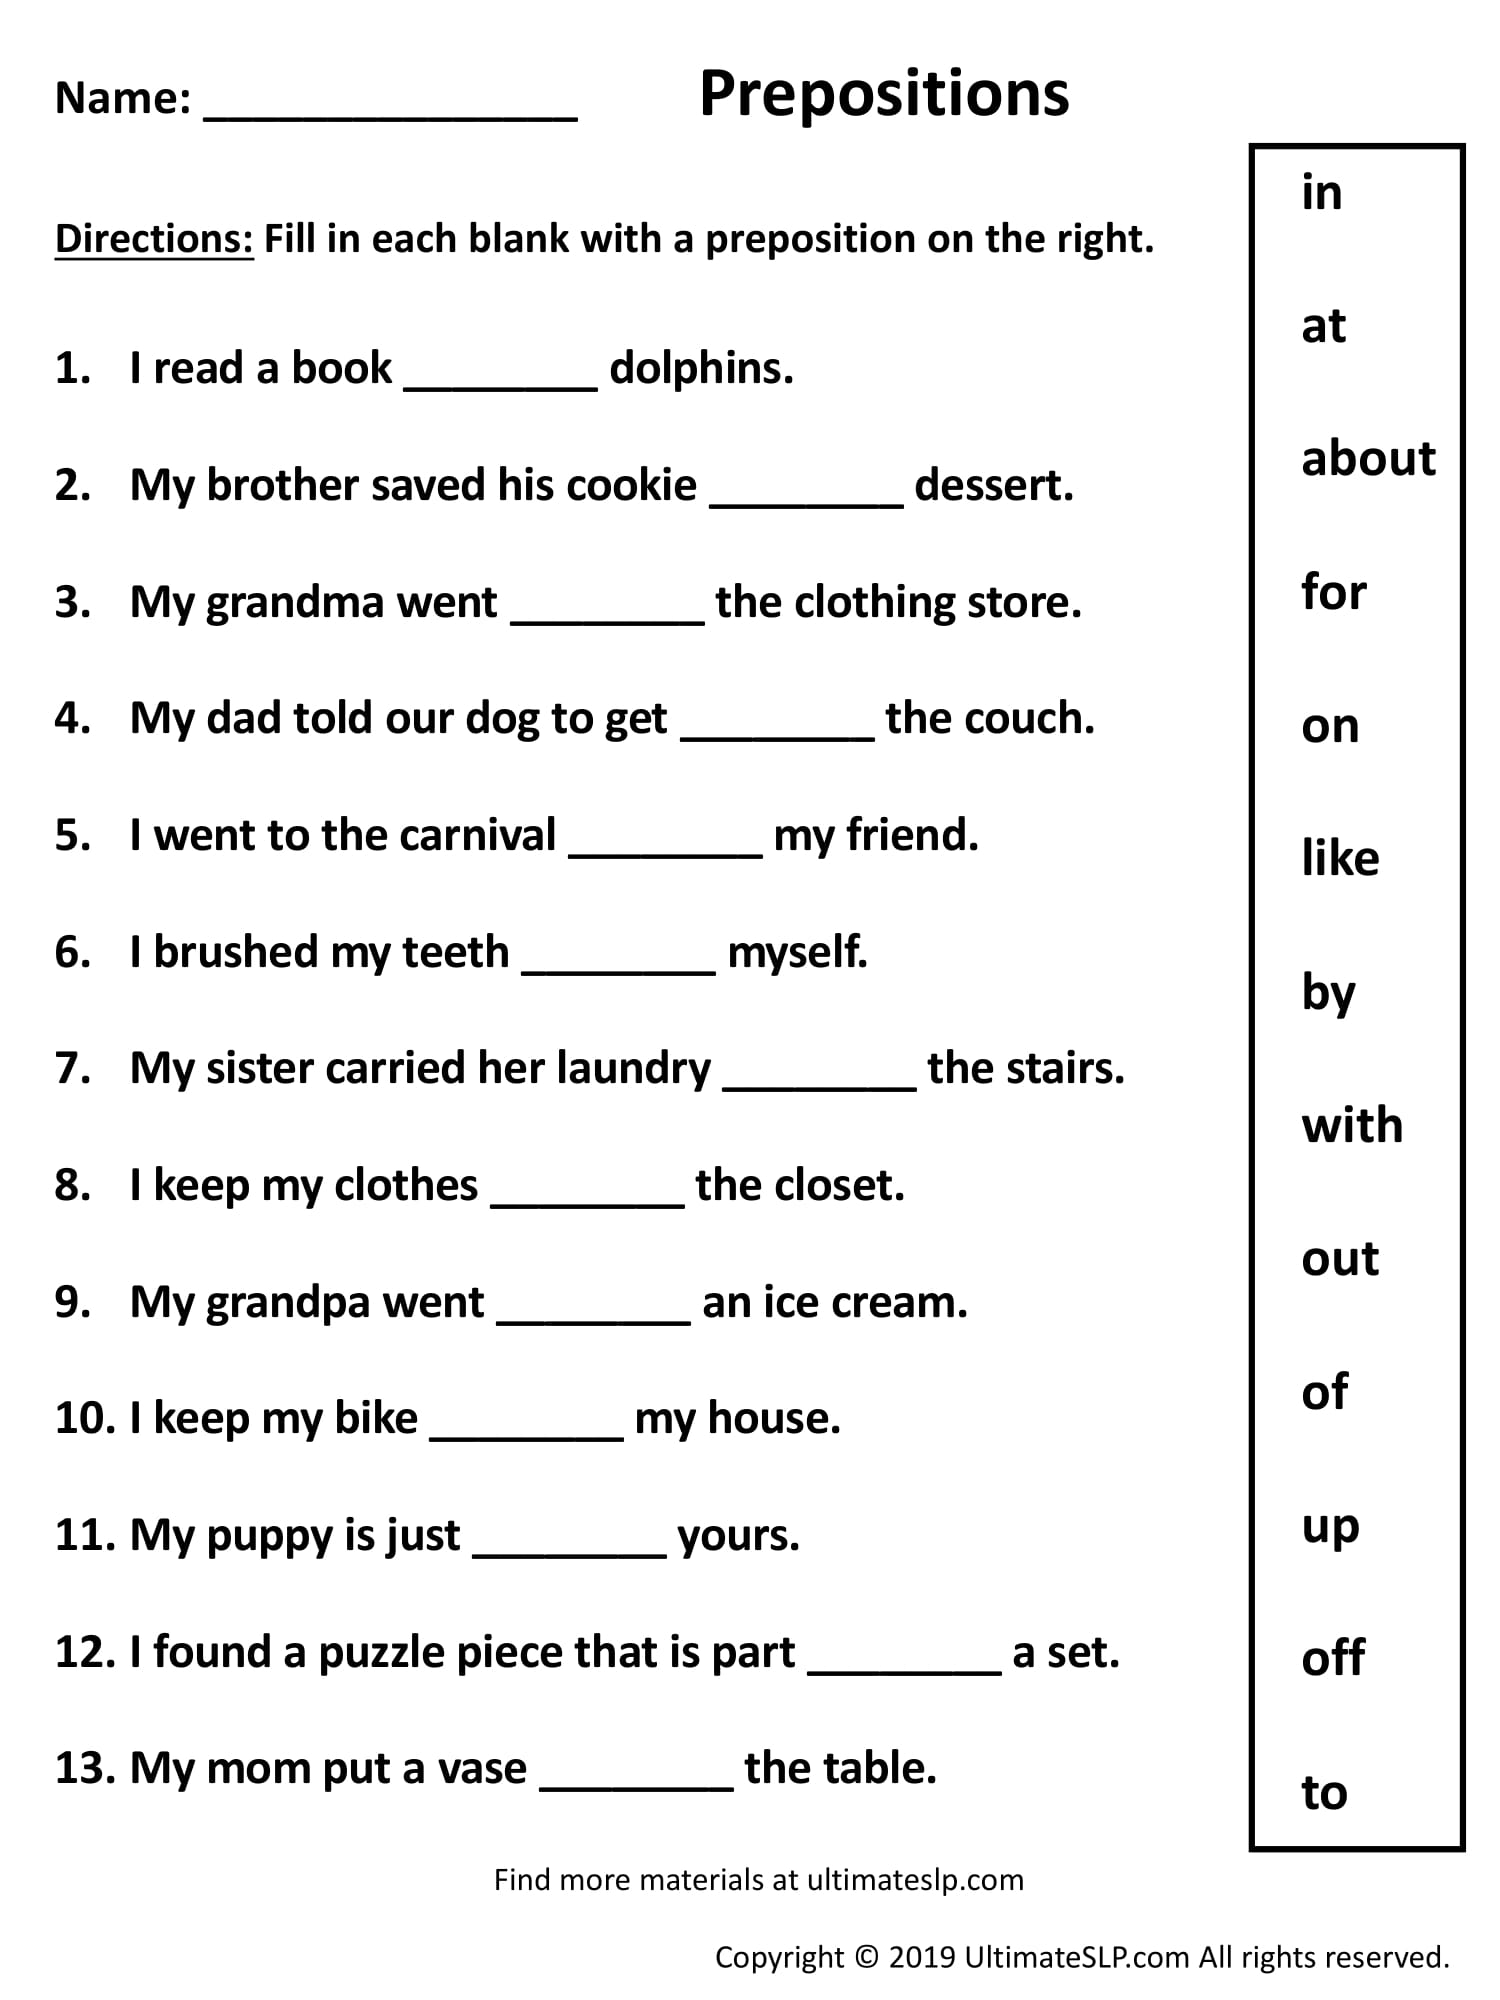 Worksheet On Prepositions For Class 5